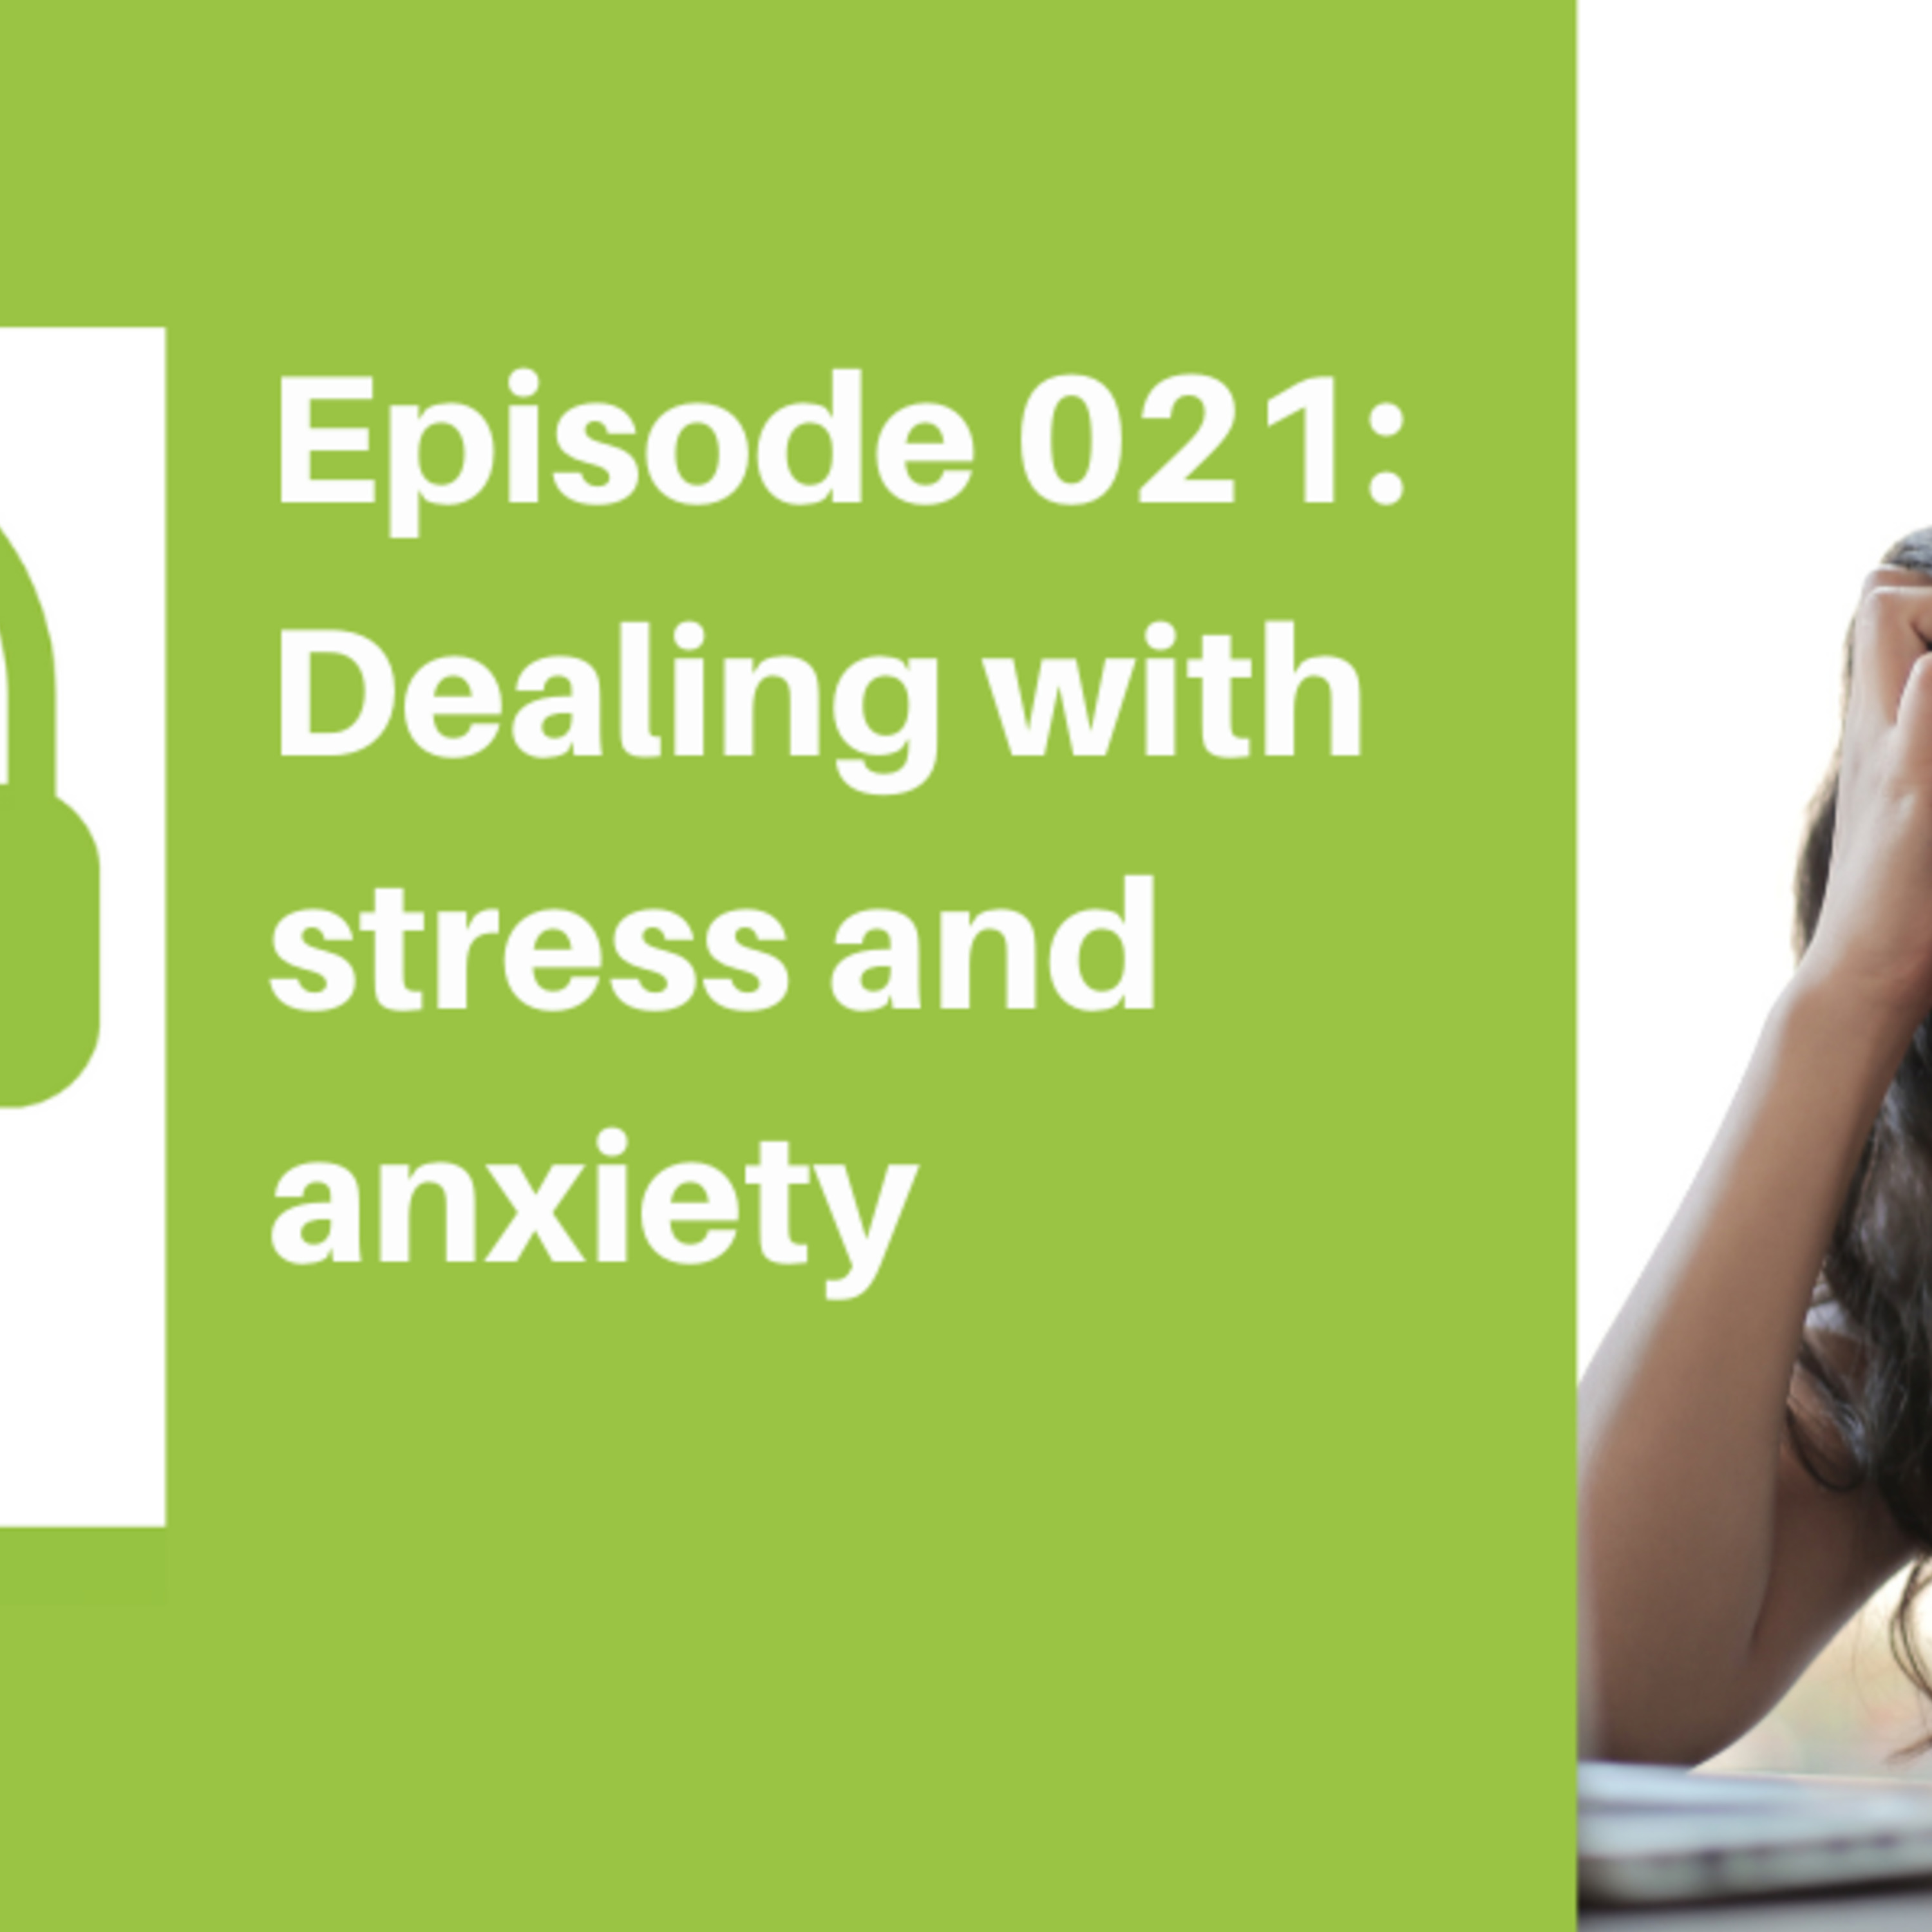 Episode 021: Dealing with Stress and Anxiety [LIFE]